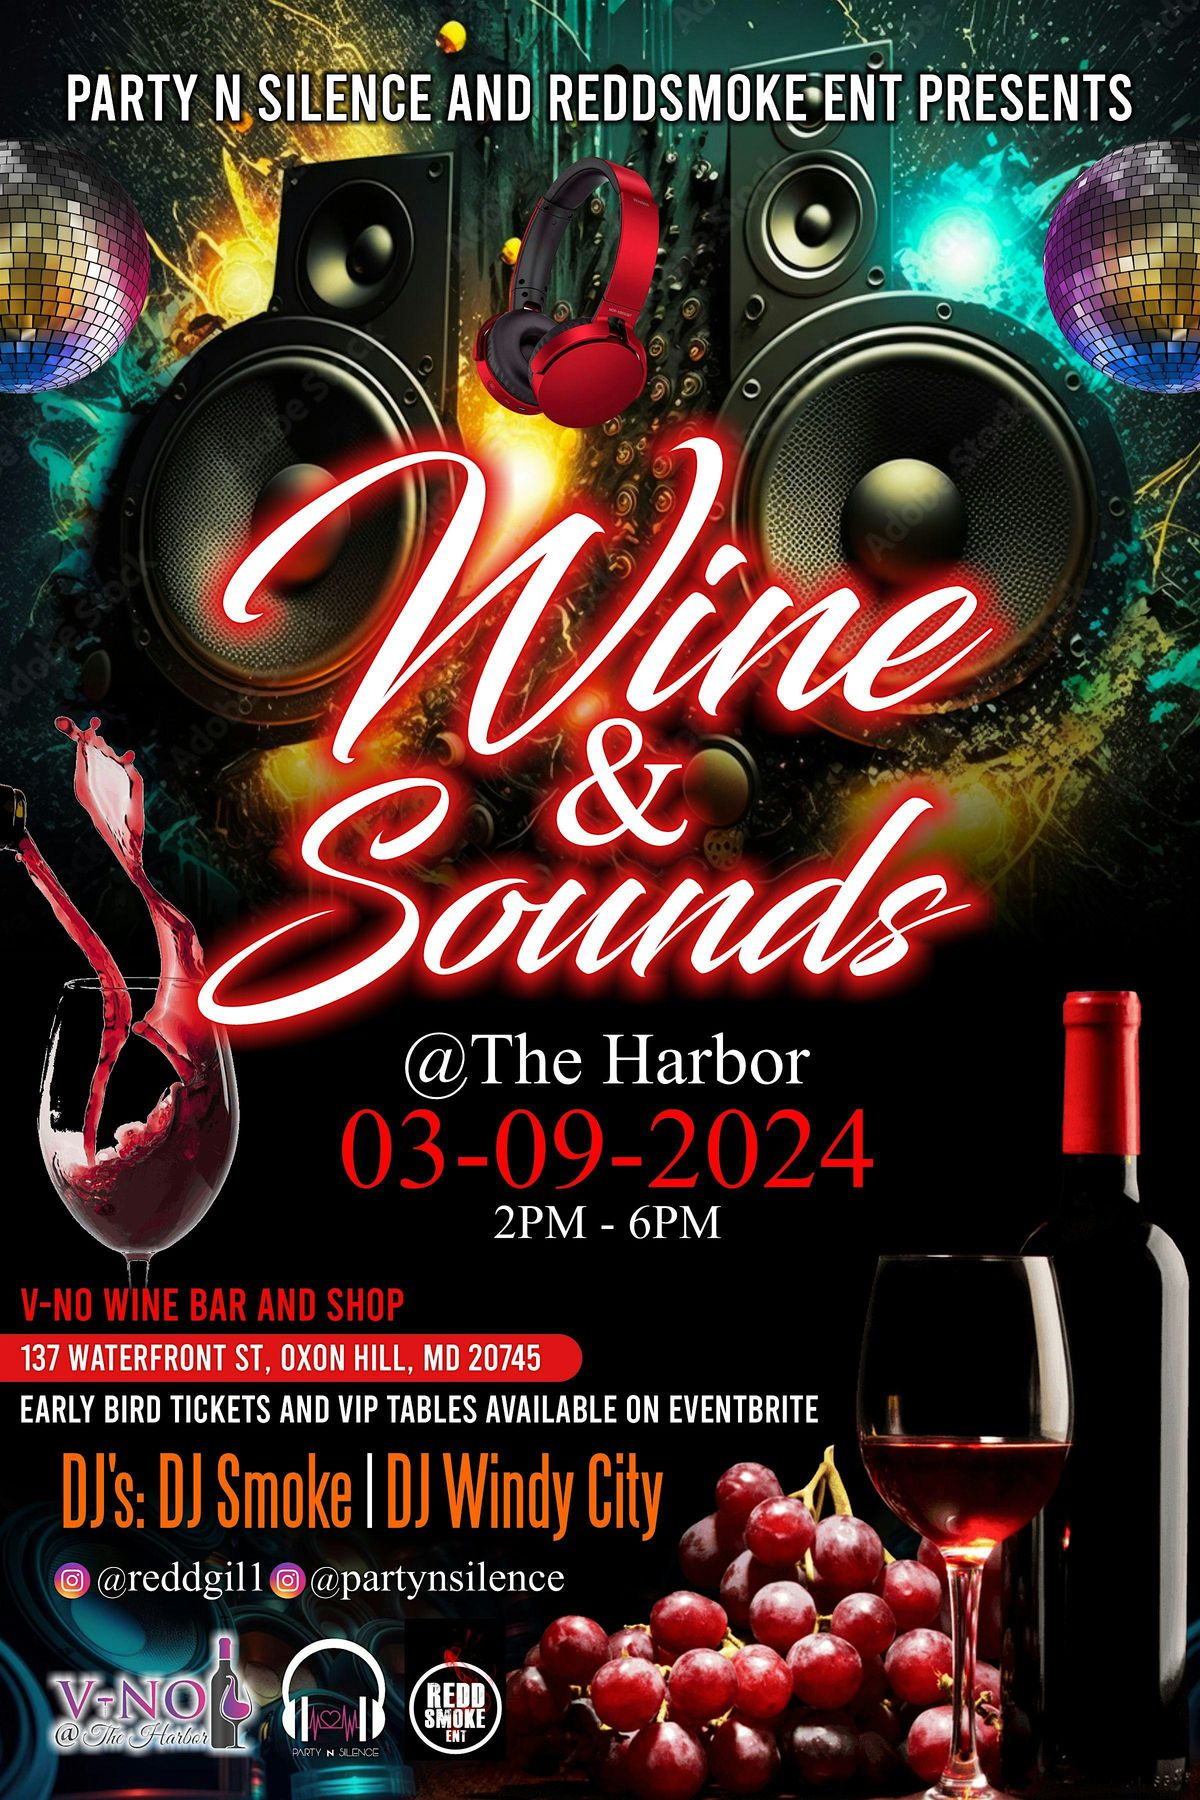 Party N Silence and Reddsmoke Ent Presents:  Wine and Sounds @The Harbor